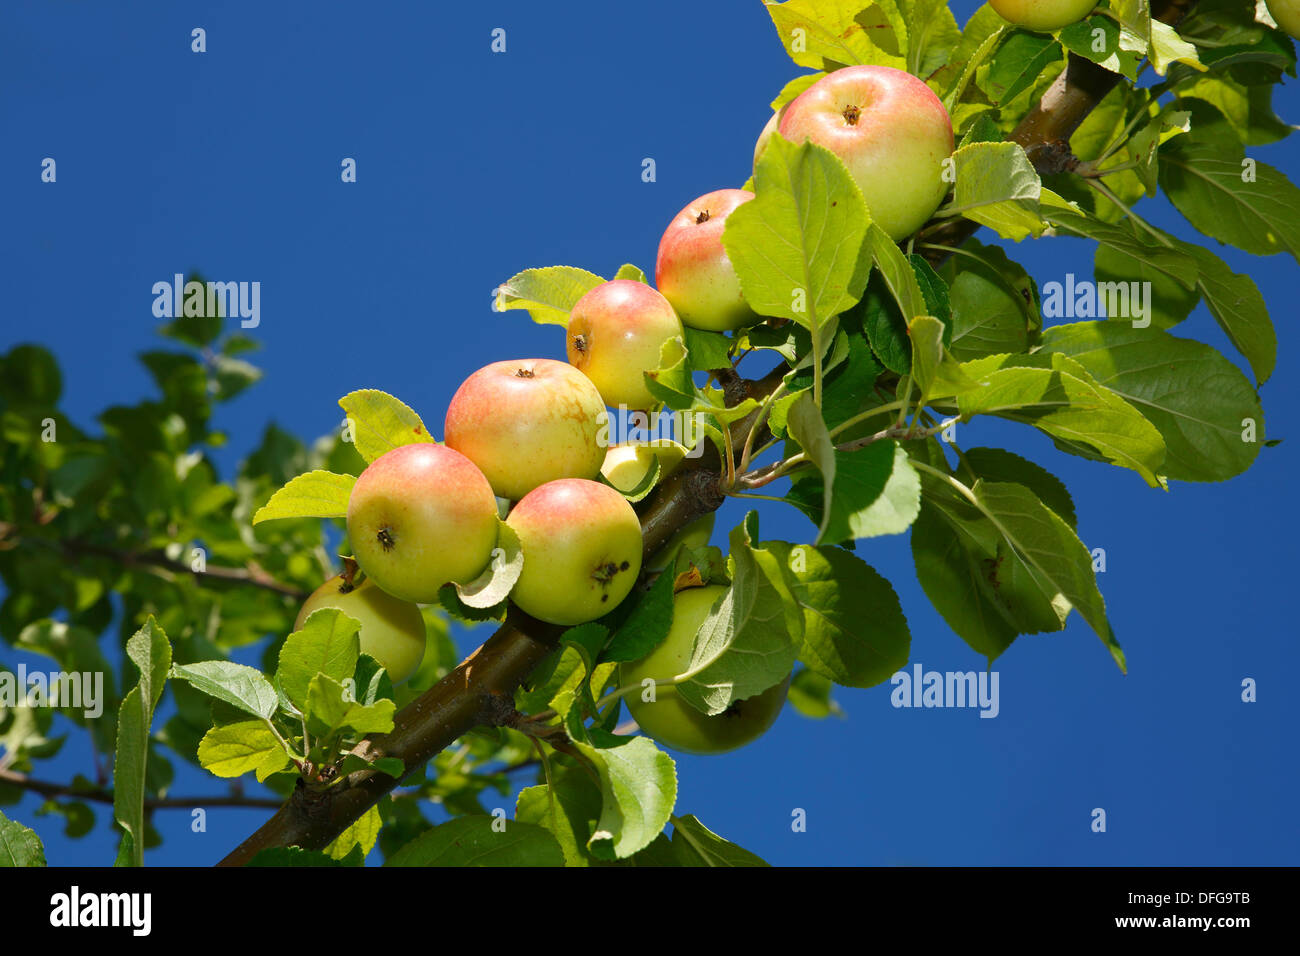 Apples on an apple tree, 'Reinette de Champagne' (Malus domestica 'Champagnerrenette') apple variety, Germany Stock Photo